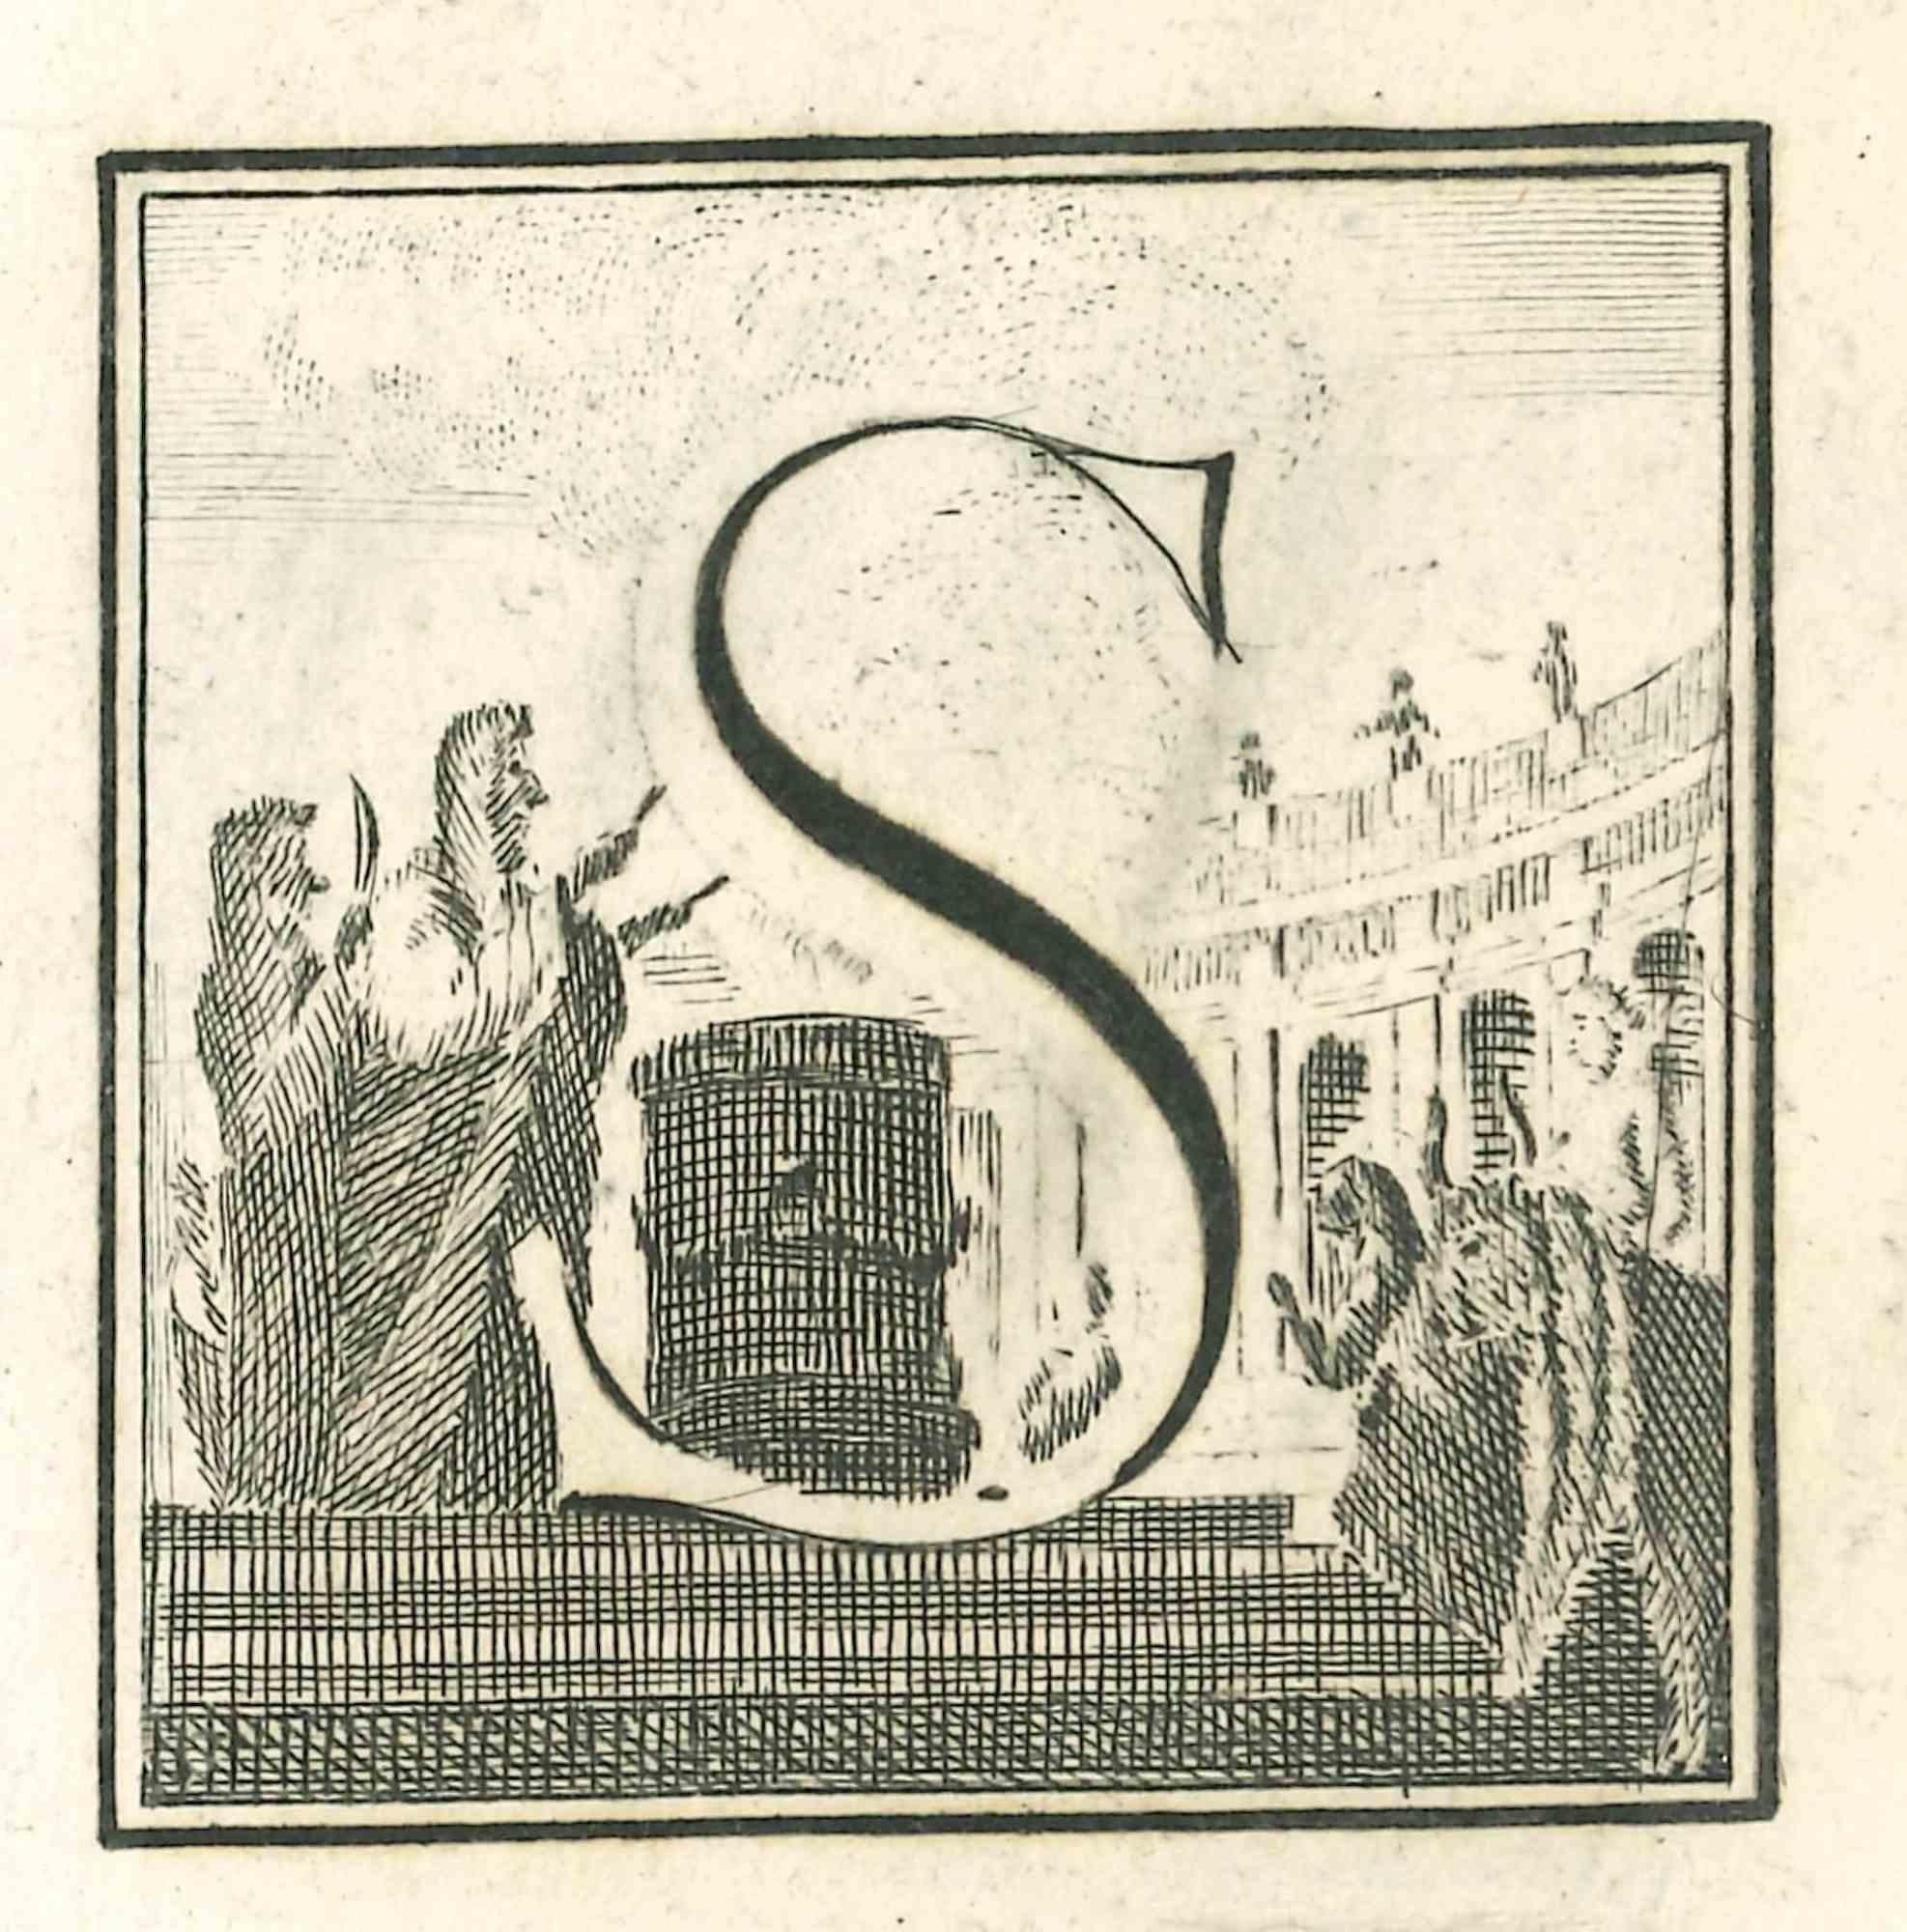 Letter S is an etching realized by Luigi Vanvitelli artist of 18th century.

The etching belongs to the print suite “Antiquities of Herculaneum Exposed” (original title: “Le Antichità di Ercolano Esposte”), an eight-volume volume of engravings of